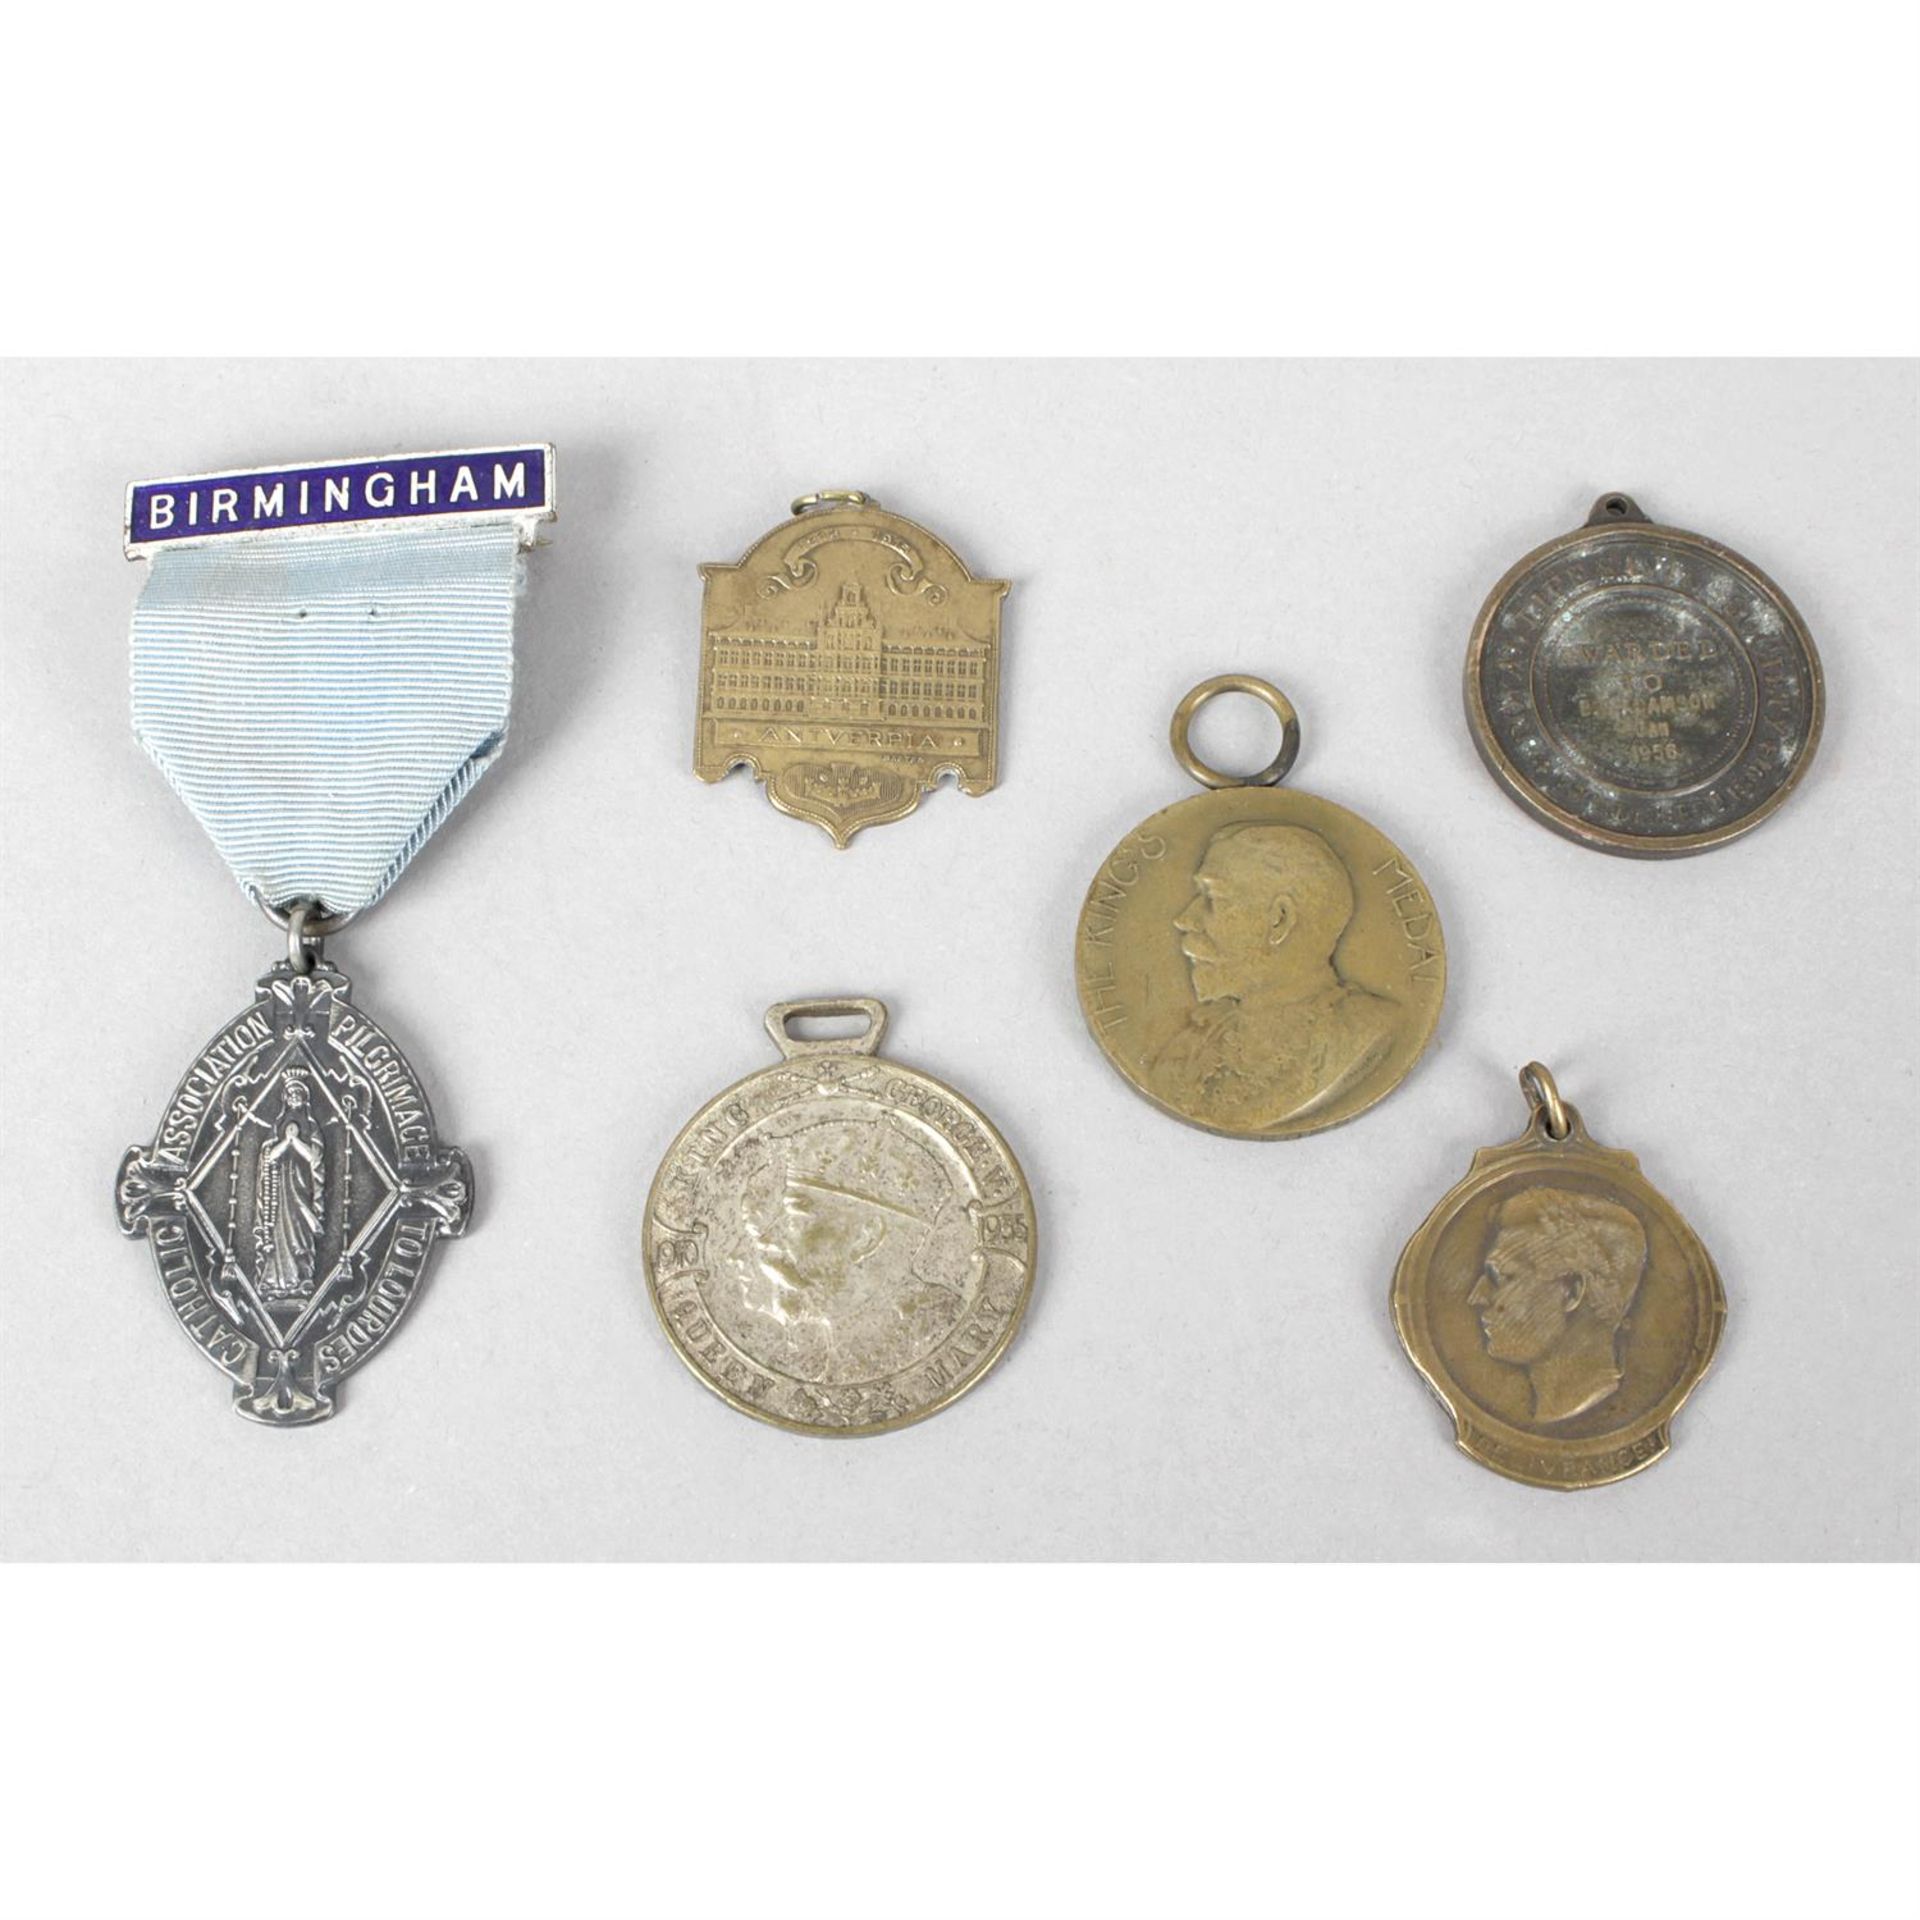 A small mixed selection of base metal badges and bronze medals.